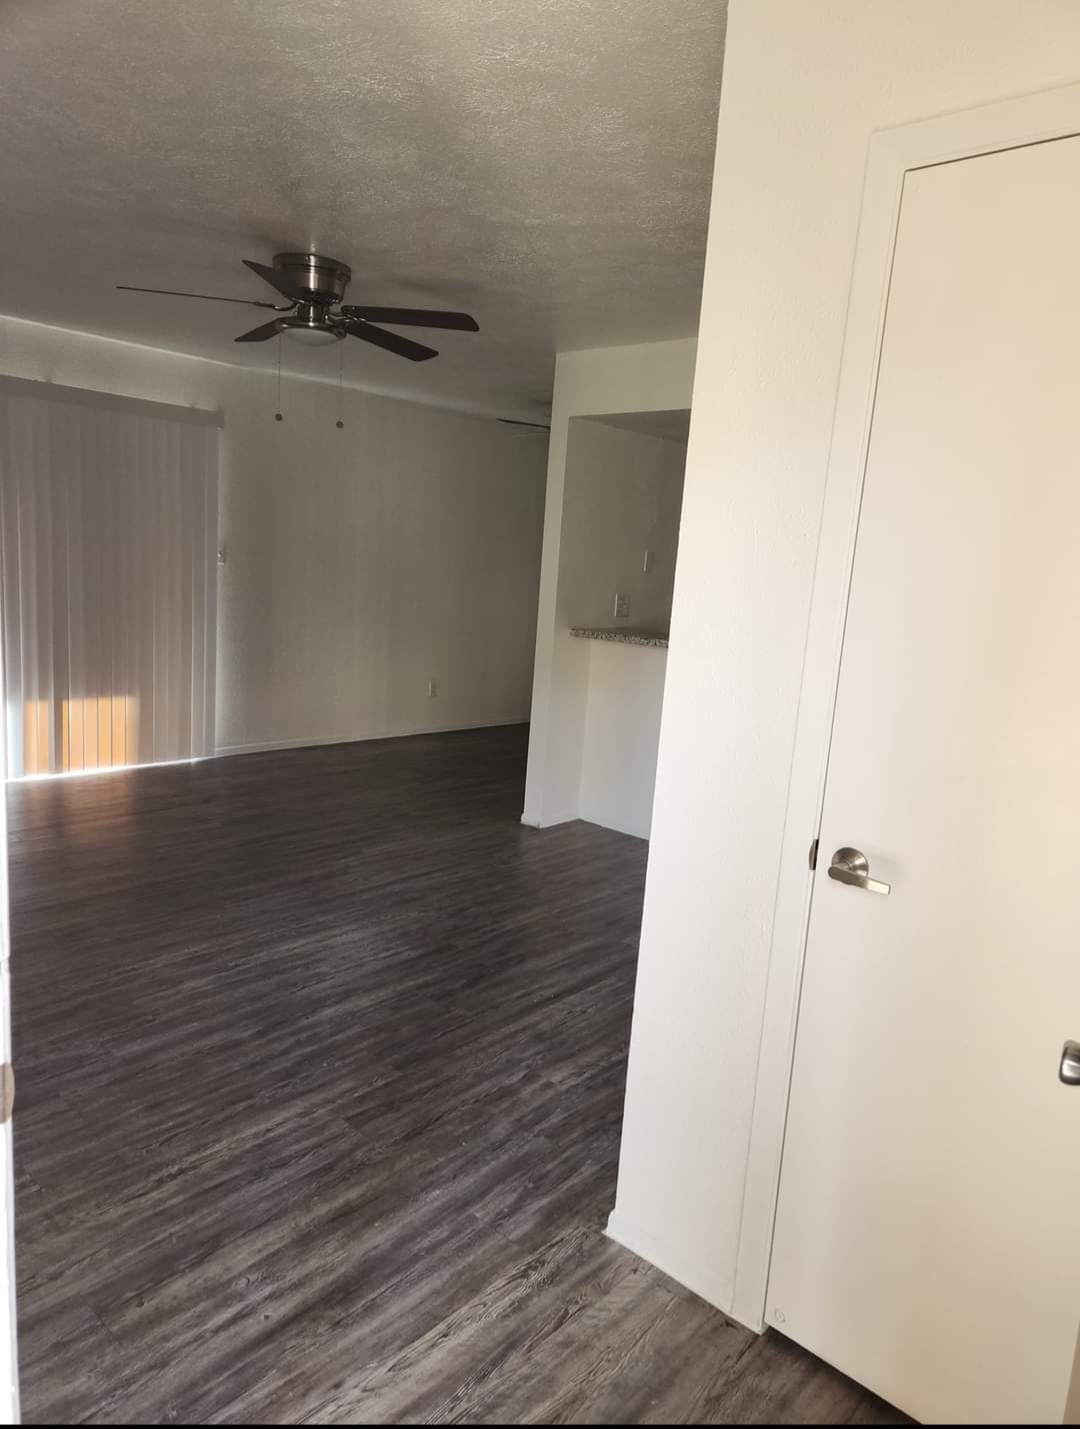 Moving into a new home is exciting, and Voodoo Clean LLC offers move-in cleaning services in Tucson, AZ, to ensure a fresh start. We thoroughly sanitize and prepare your new space so that you can settle in without the worry of lingering dirt or grime.